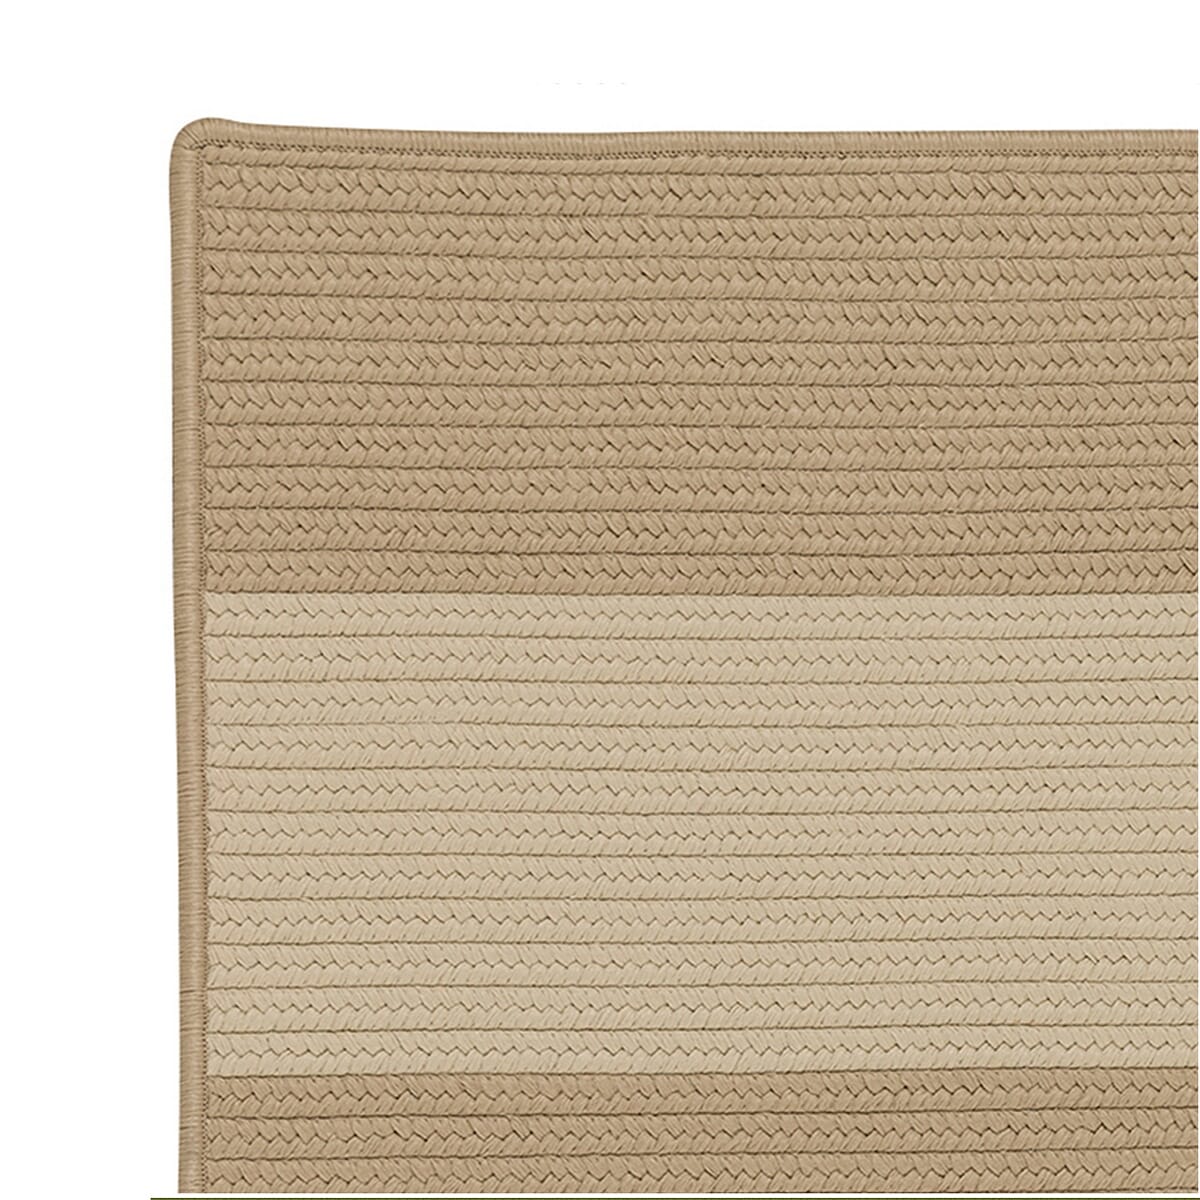 Colonial Mills Newport Textured Stripe Nw26 Naturals Striped Area Rug